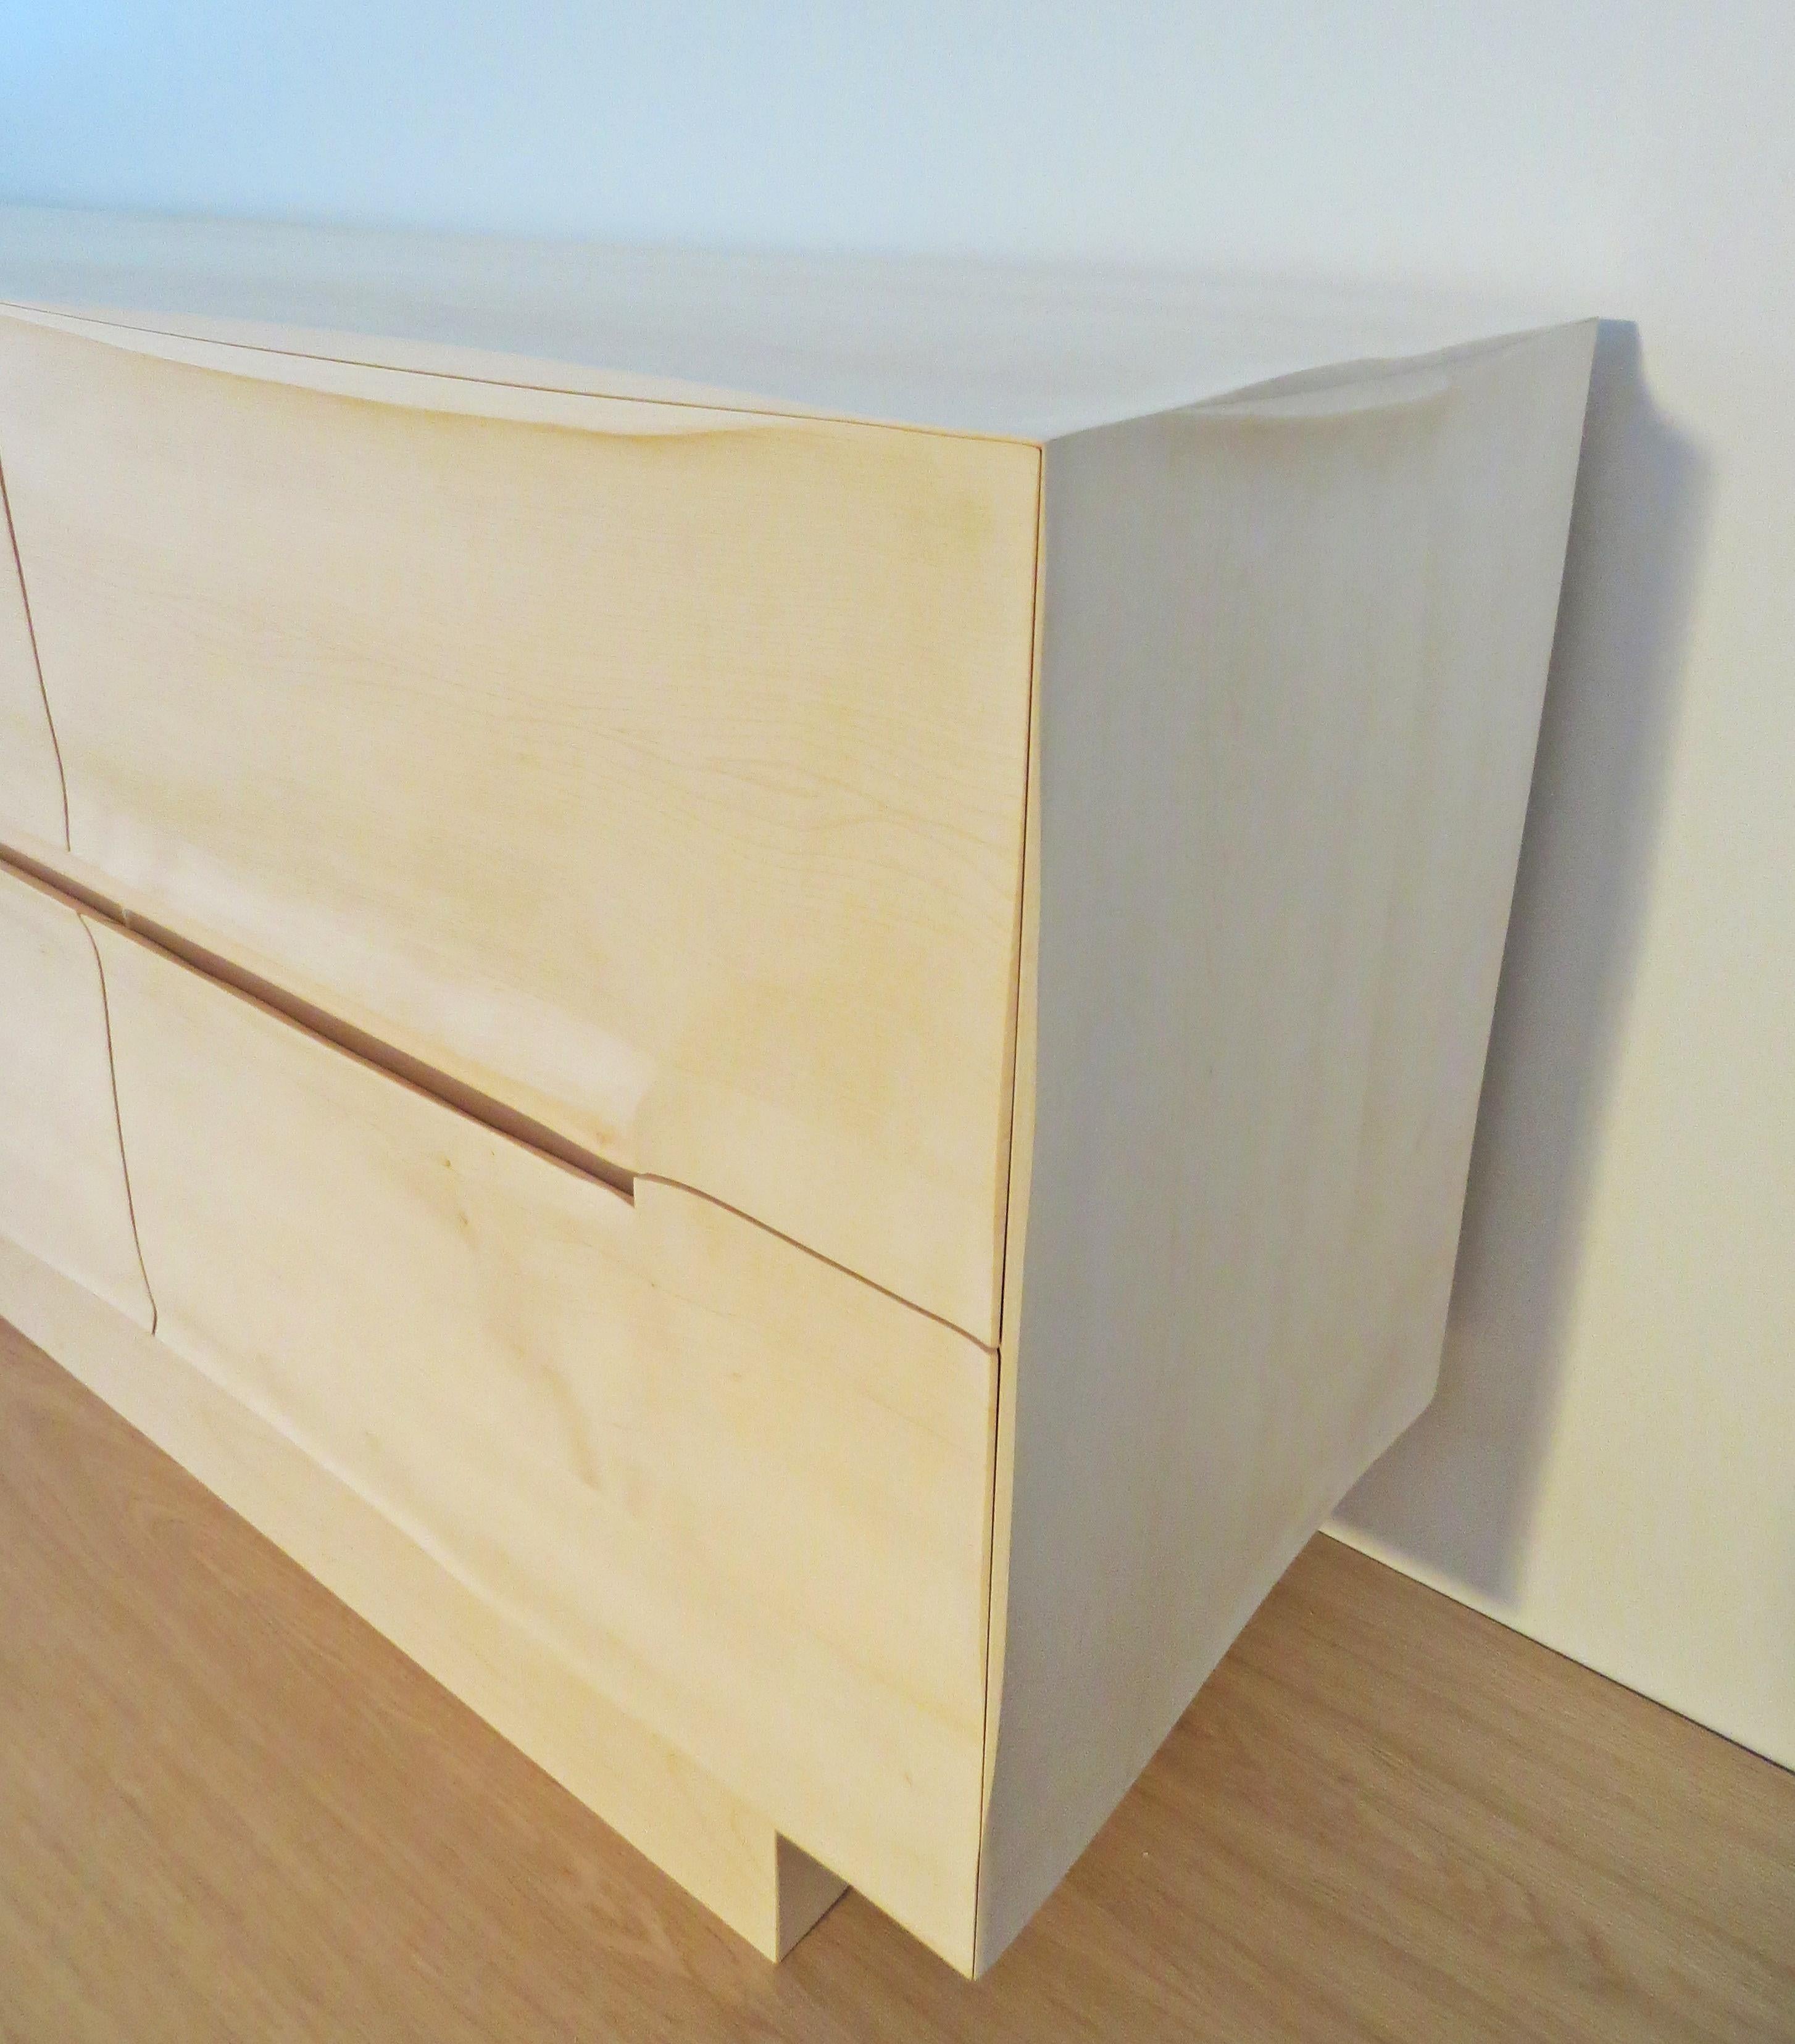 Sideboard Solid Wood, Organic Modern Design, Handcrafted in Germany, Sculptural For Sale 1